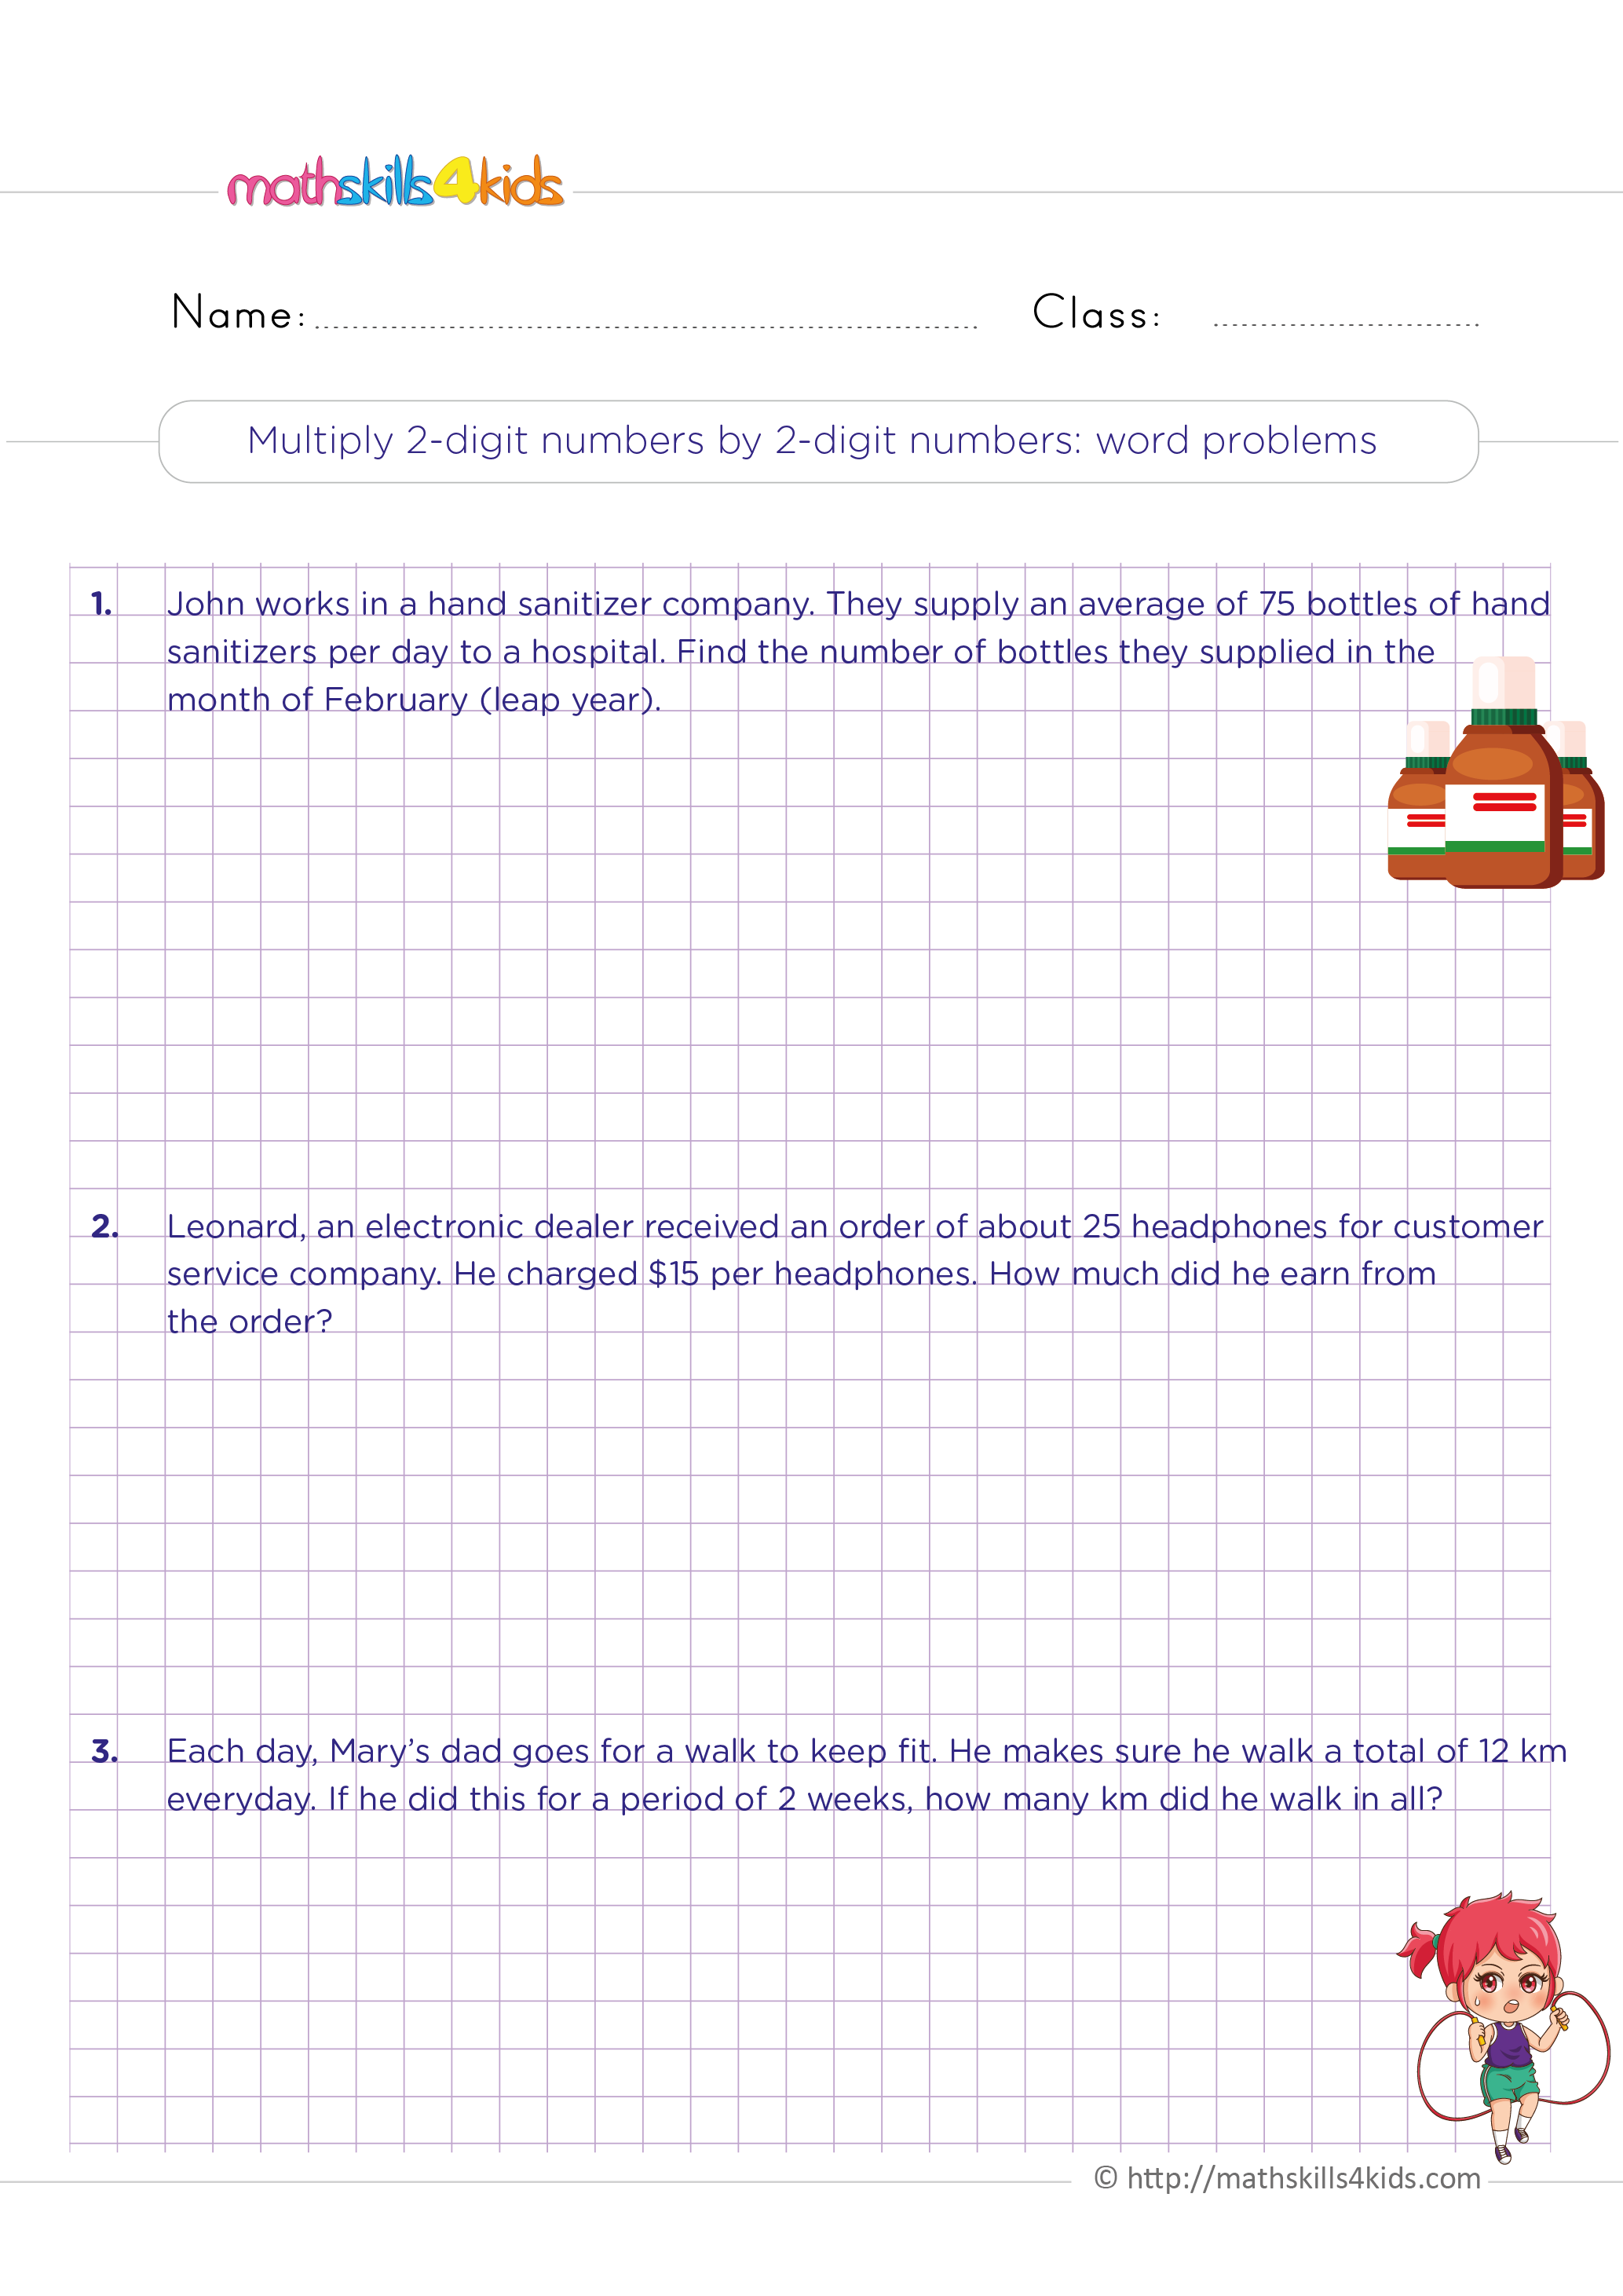 Multiplication Worksheets Grade 4 printable with answers - Multiplication of 2-digit by 2-digit numbers word problems